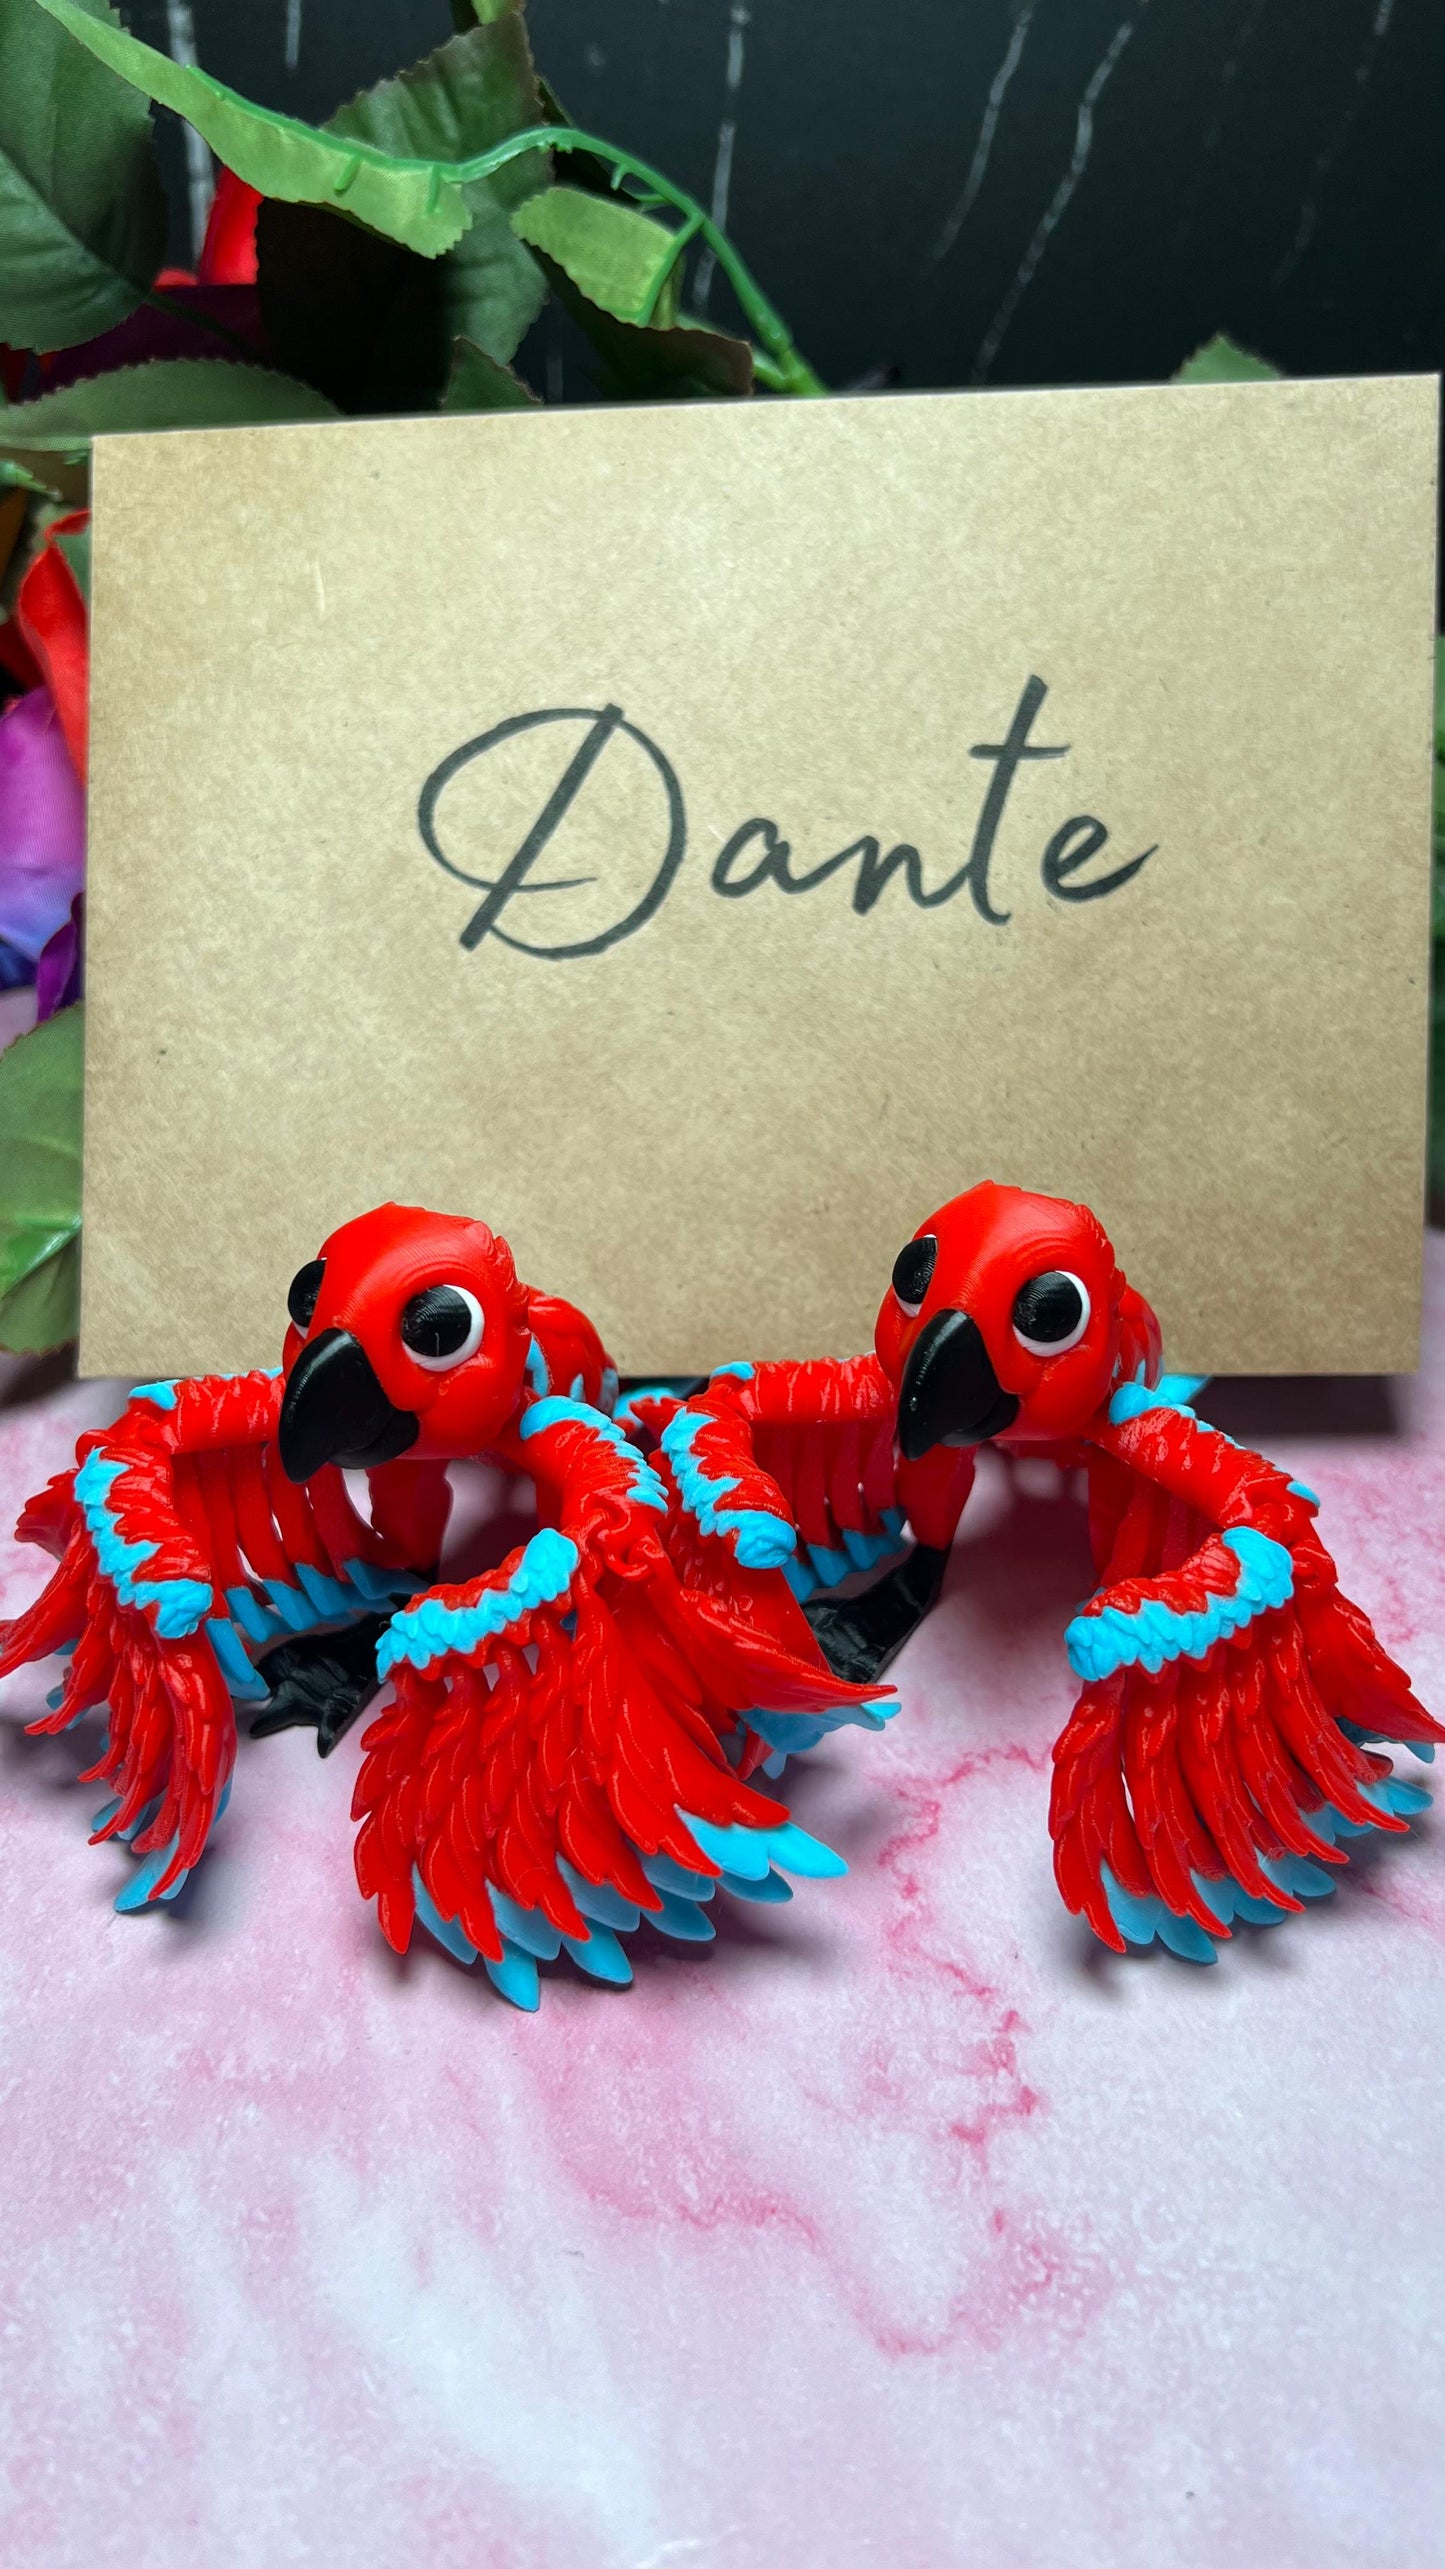 Dante - The Scarlet Macaw  - Mythical Pets